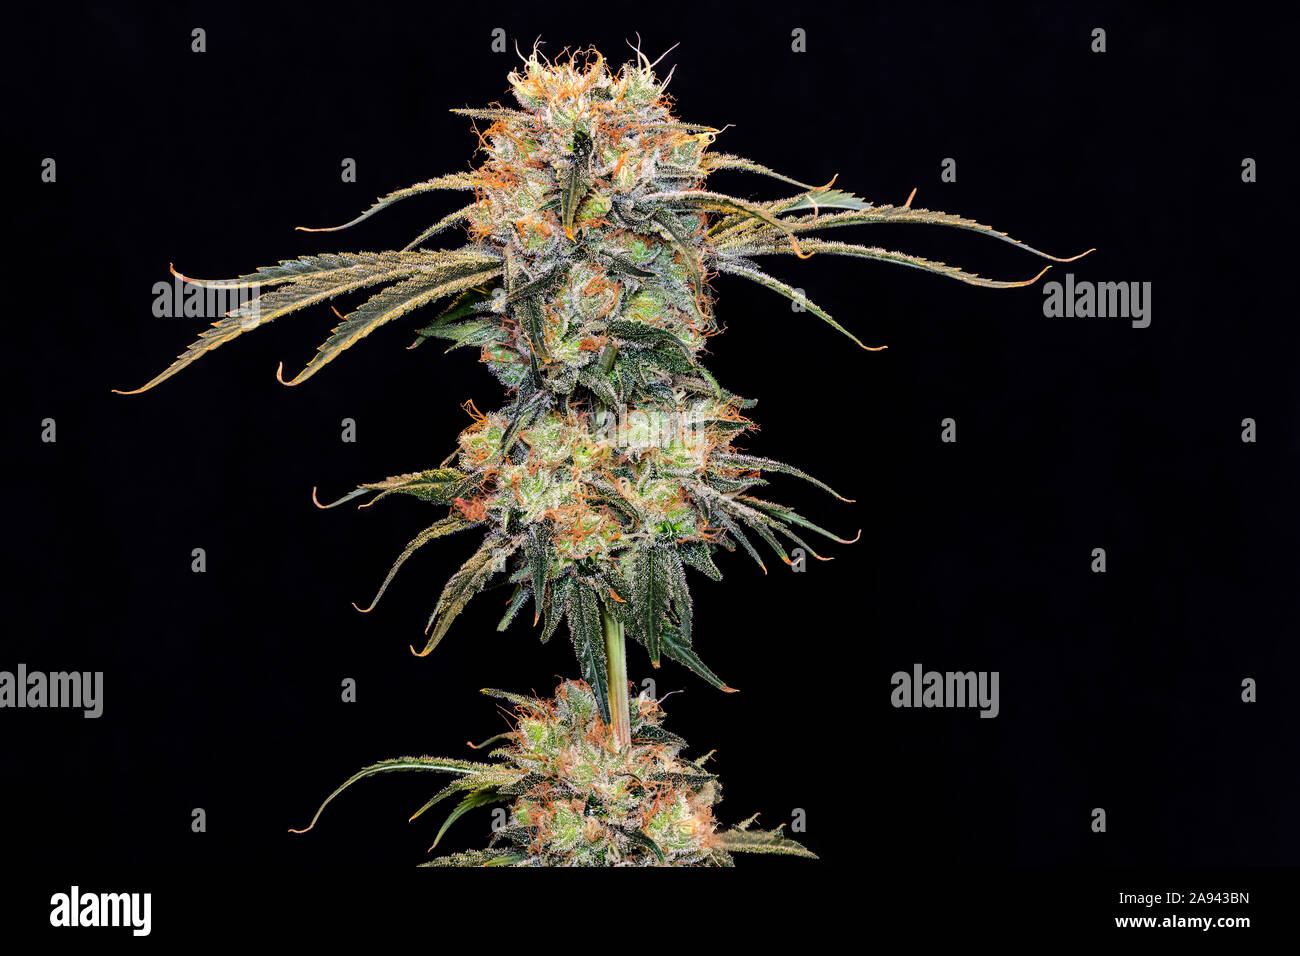 Cannabis plant in late flowering stage on a black background Stock Photo